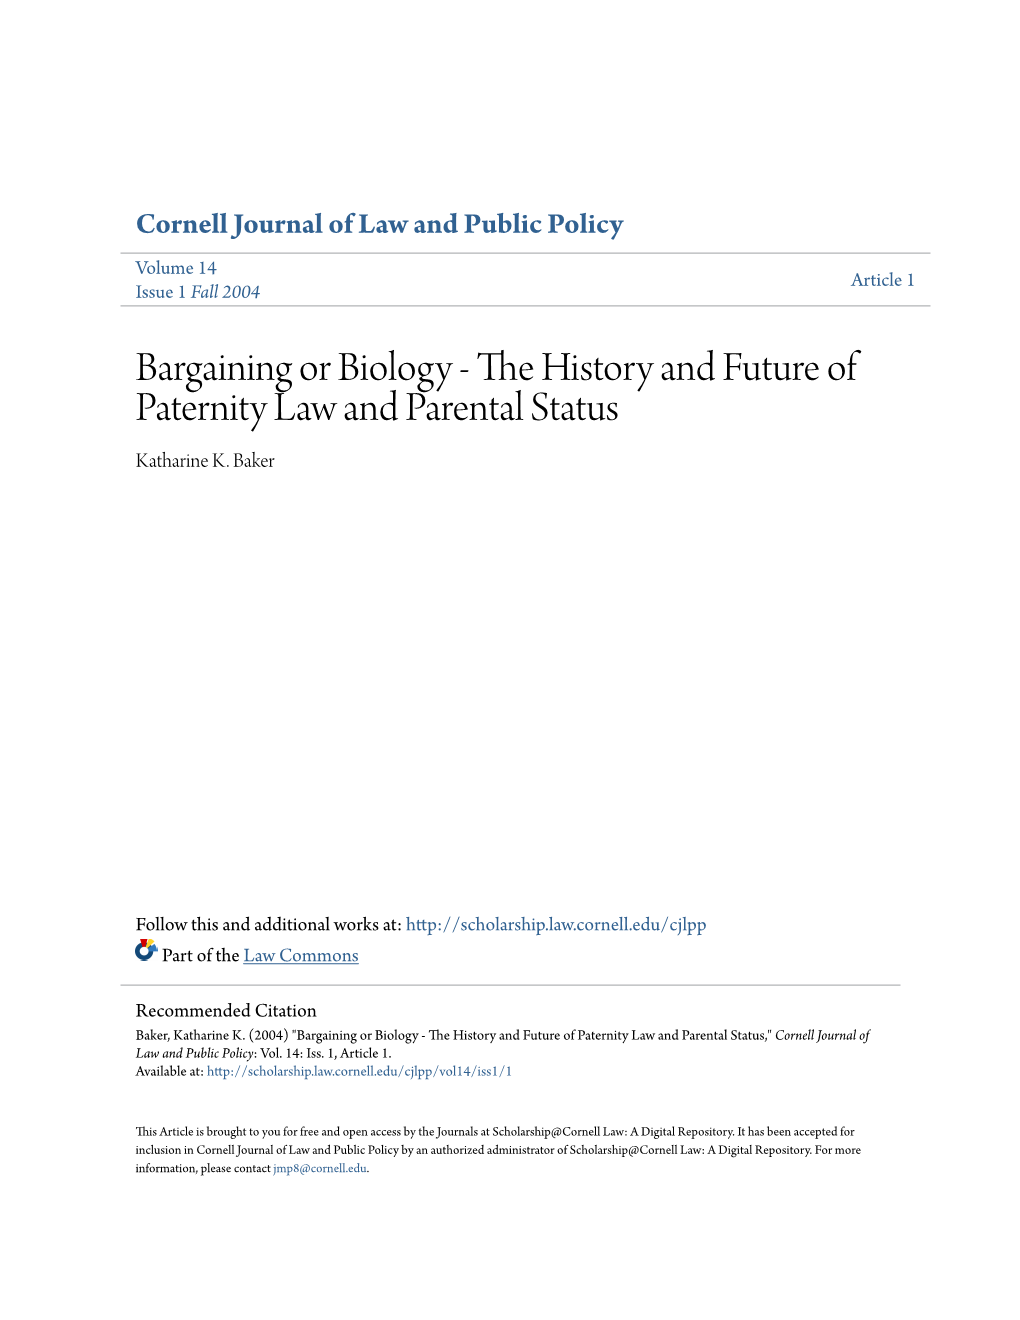 The History and Future of Paternity Law and Parental Status